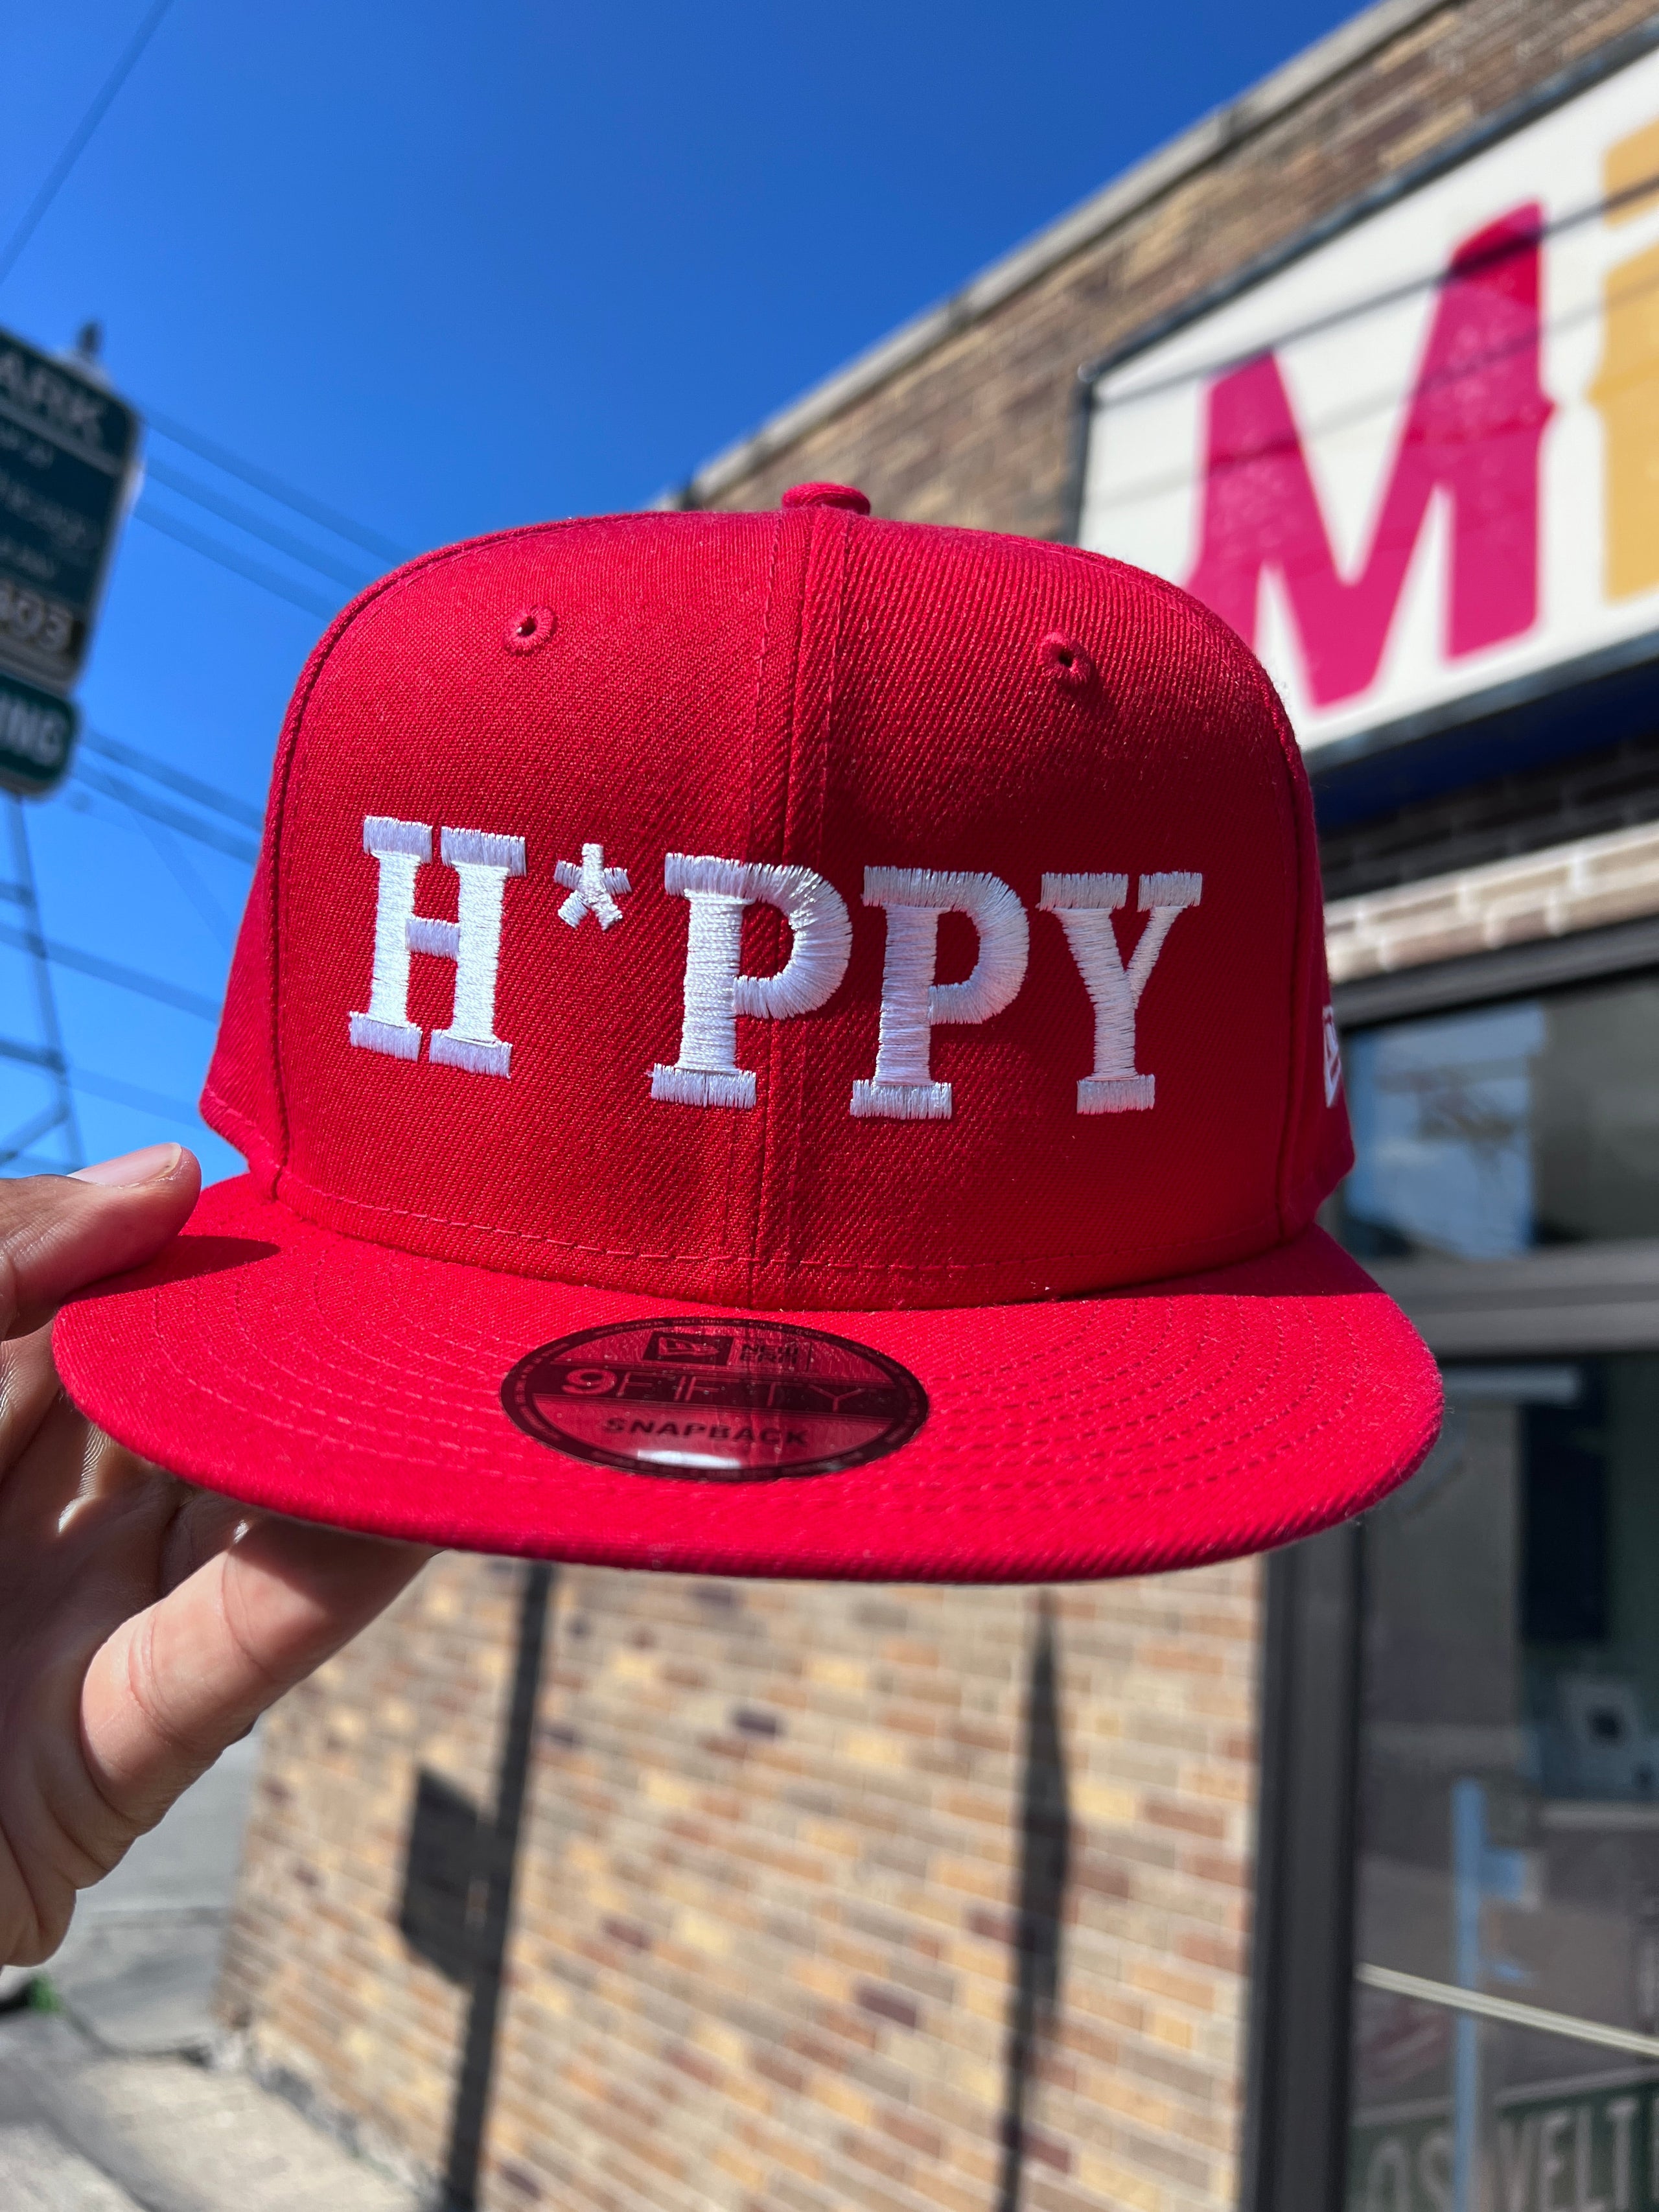 H*PPY Hat